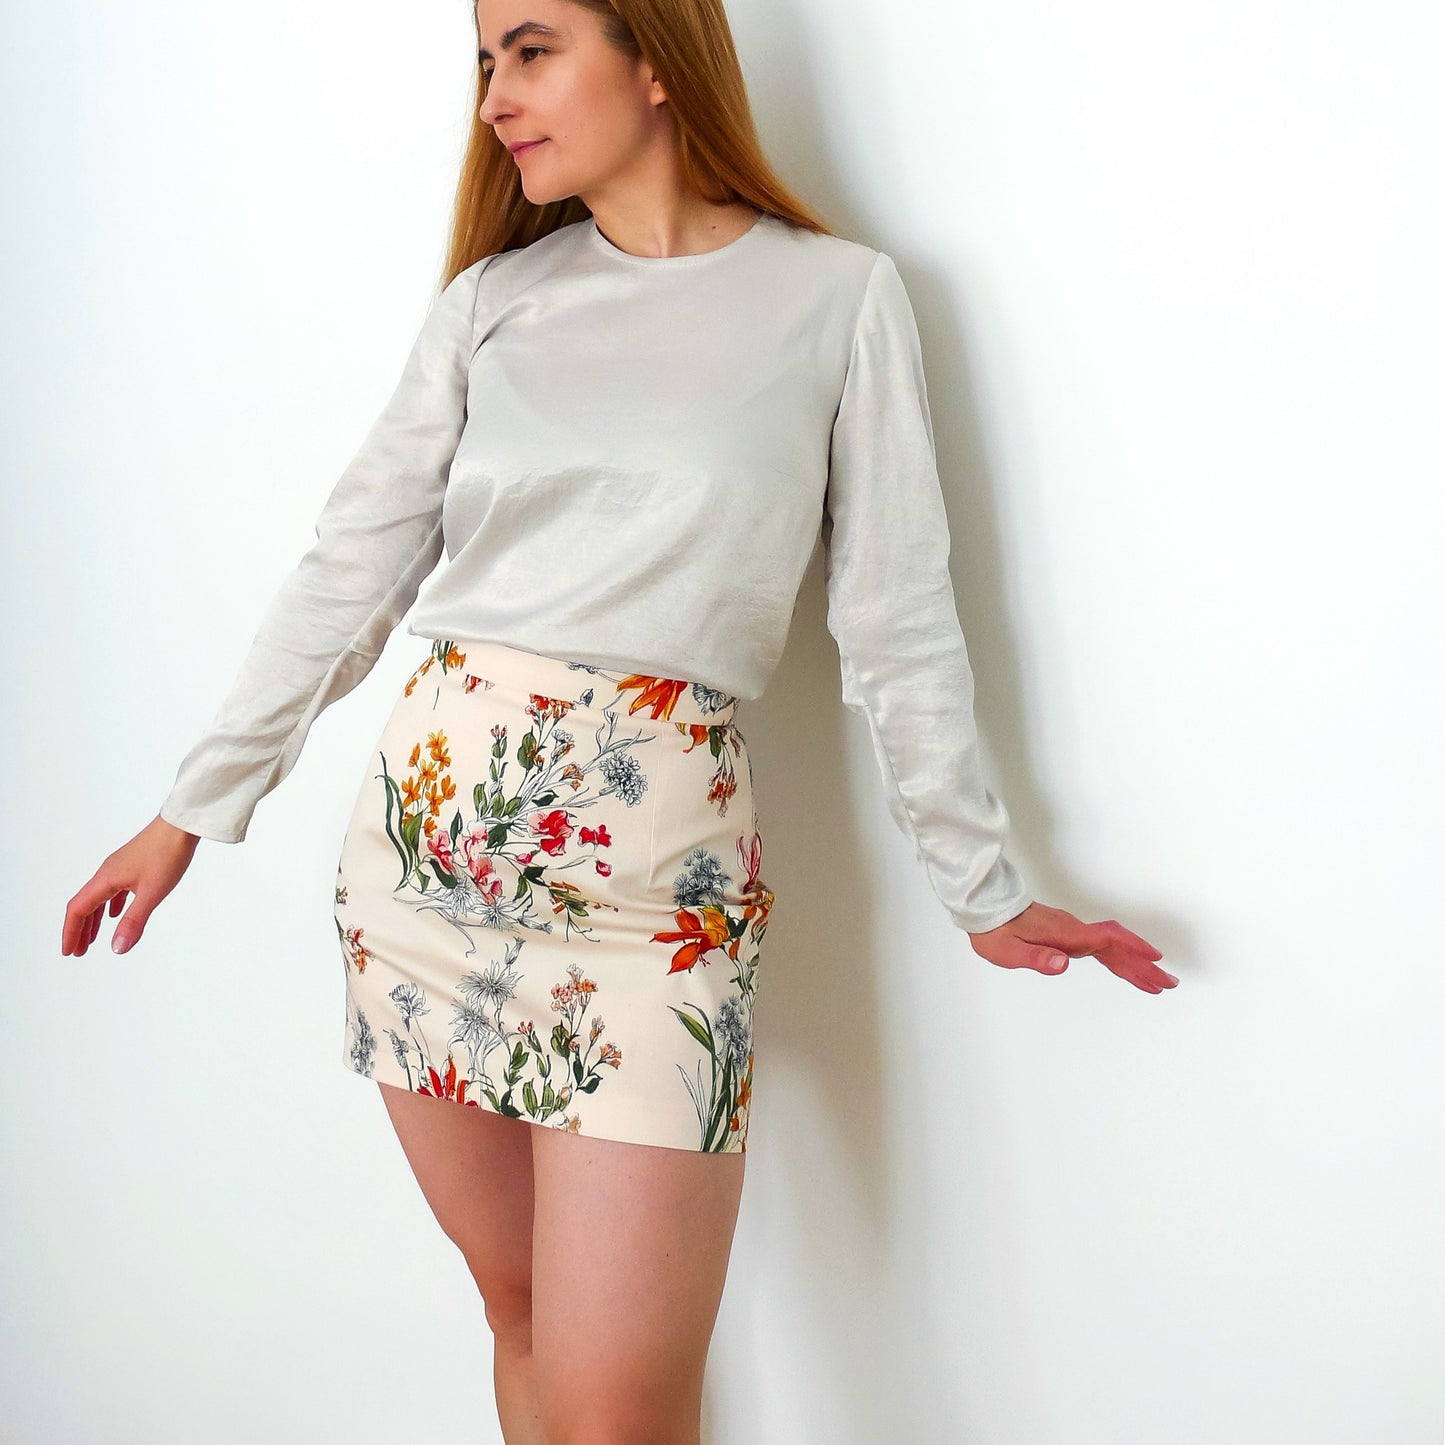 A woman posing in a light-colored satin top with long sleeves and a high-waisted floral mini-skirt. It's a front view.